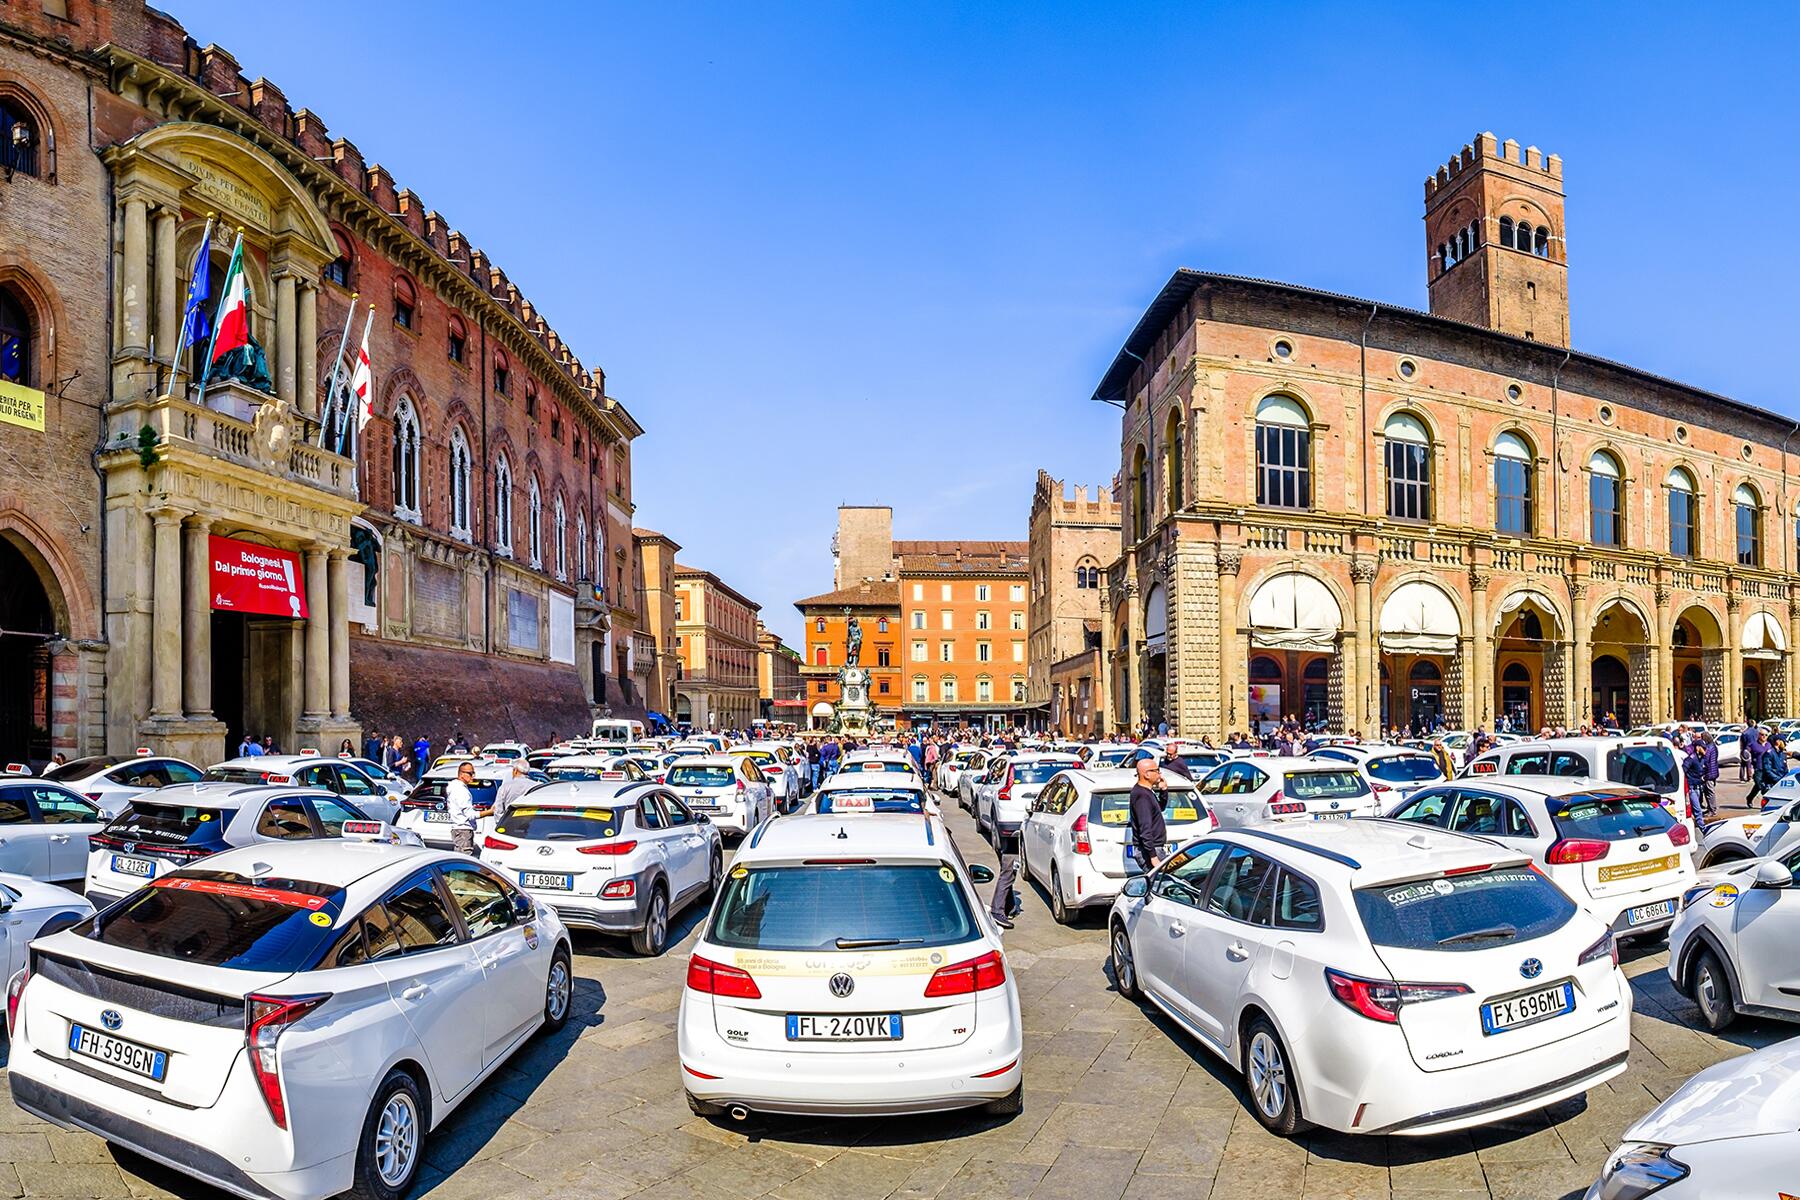 <a href='https://www.fodors.com/world/europe/italy/experiences/news/photos/common-scams-in-italy#'>From &quot;Watch Out for These 10 Common Scams When You’re in Italy This Summer: Taxi Drivers&quot;</a>